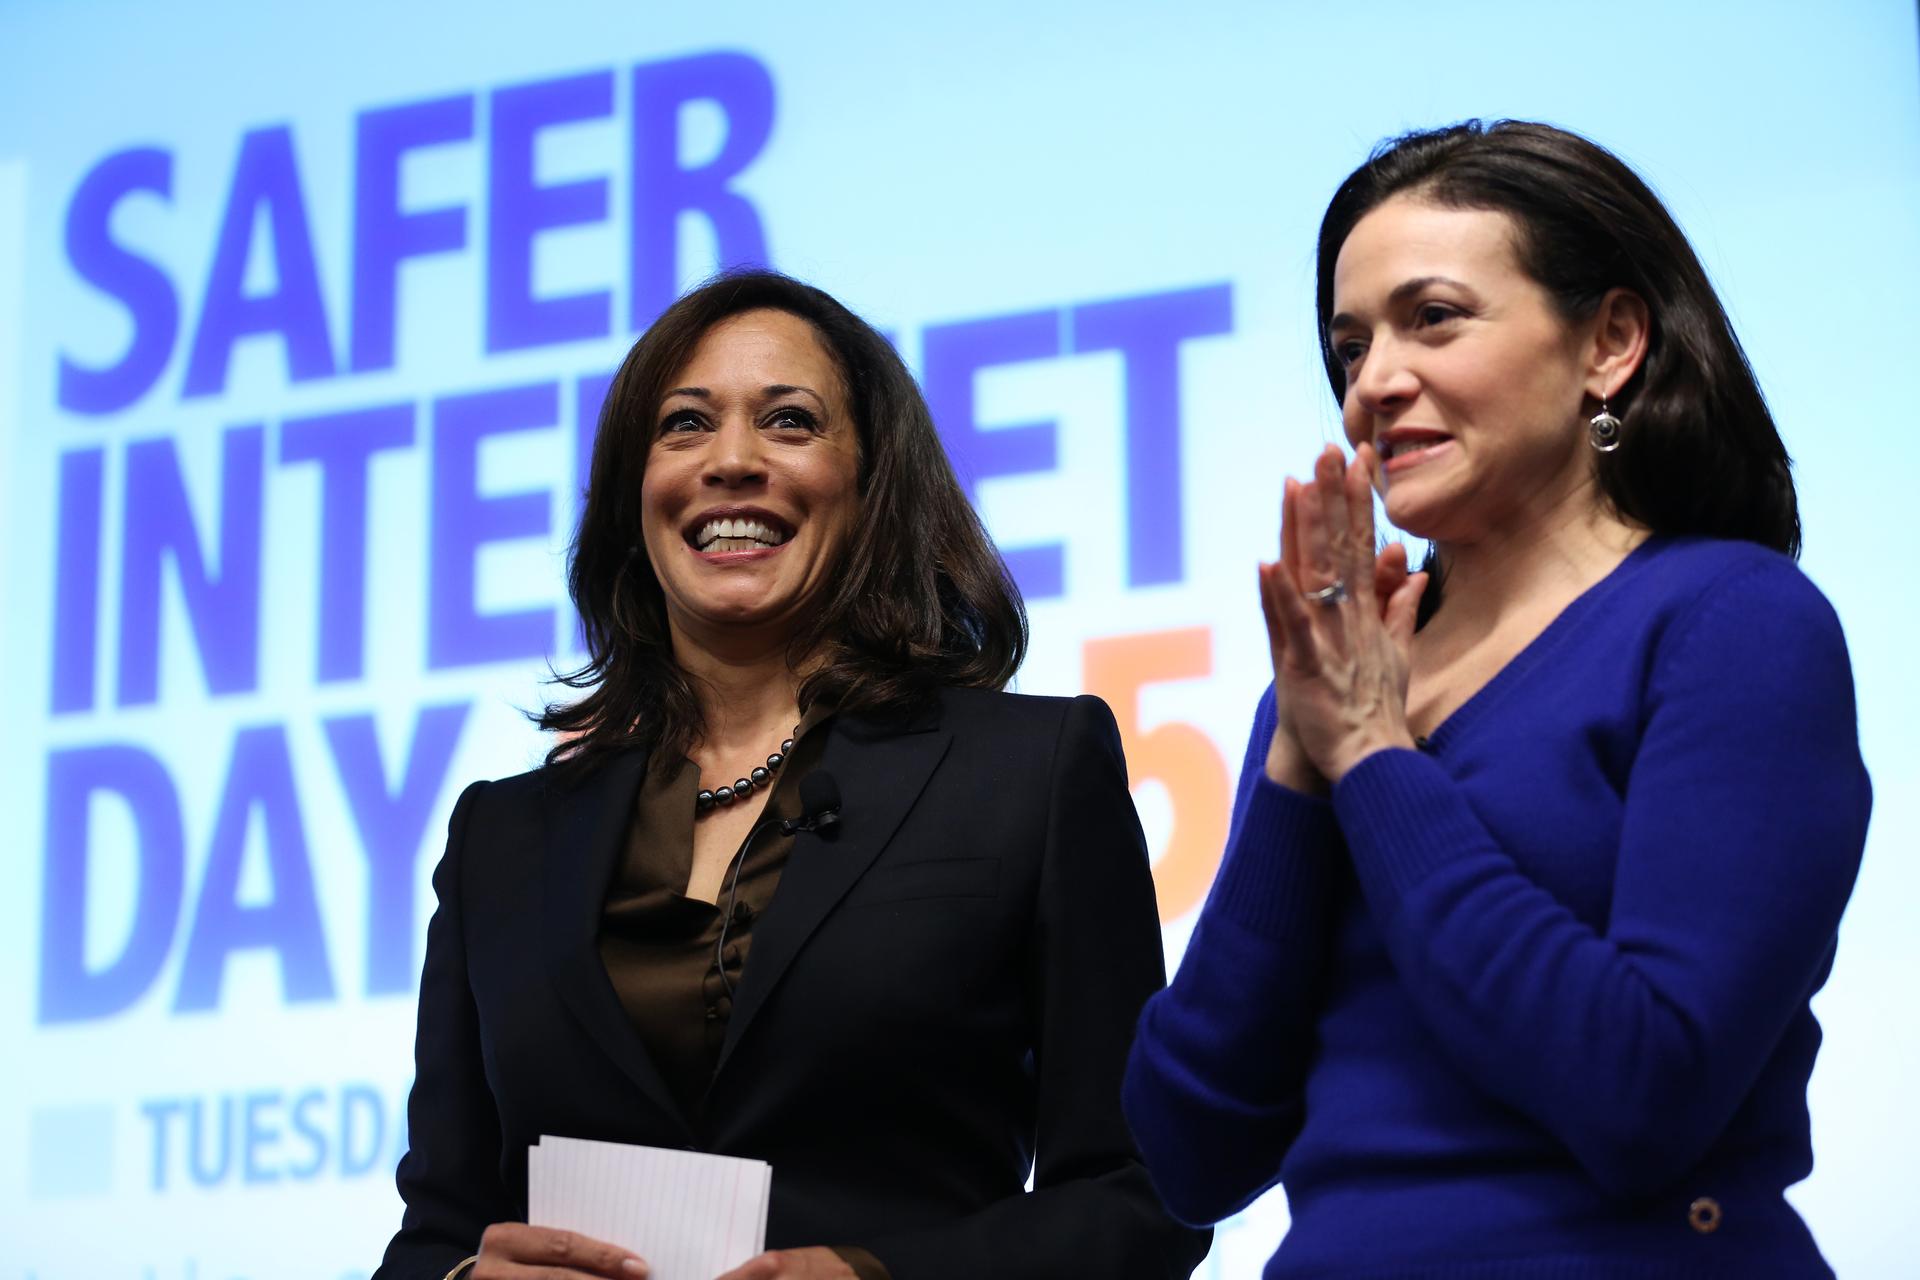 California Attorney General Kamala Harris, at left, shares the stage with Facebook COO Sheryl Sandberg following Harris' address at the Facebook headquarters in Menlo Park, California on February 10, 2015.